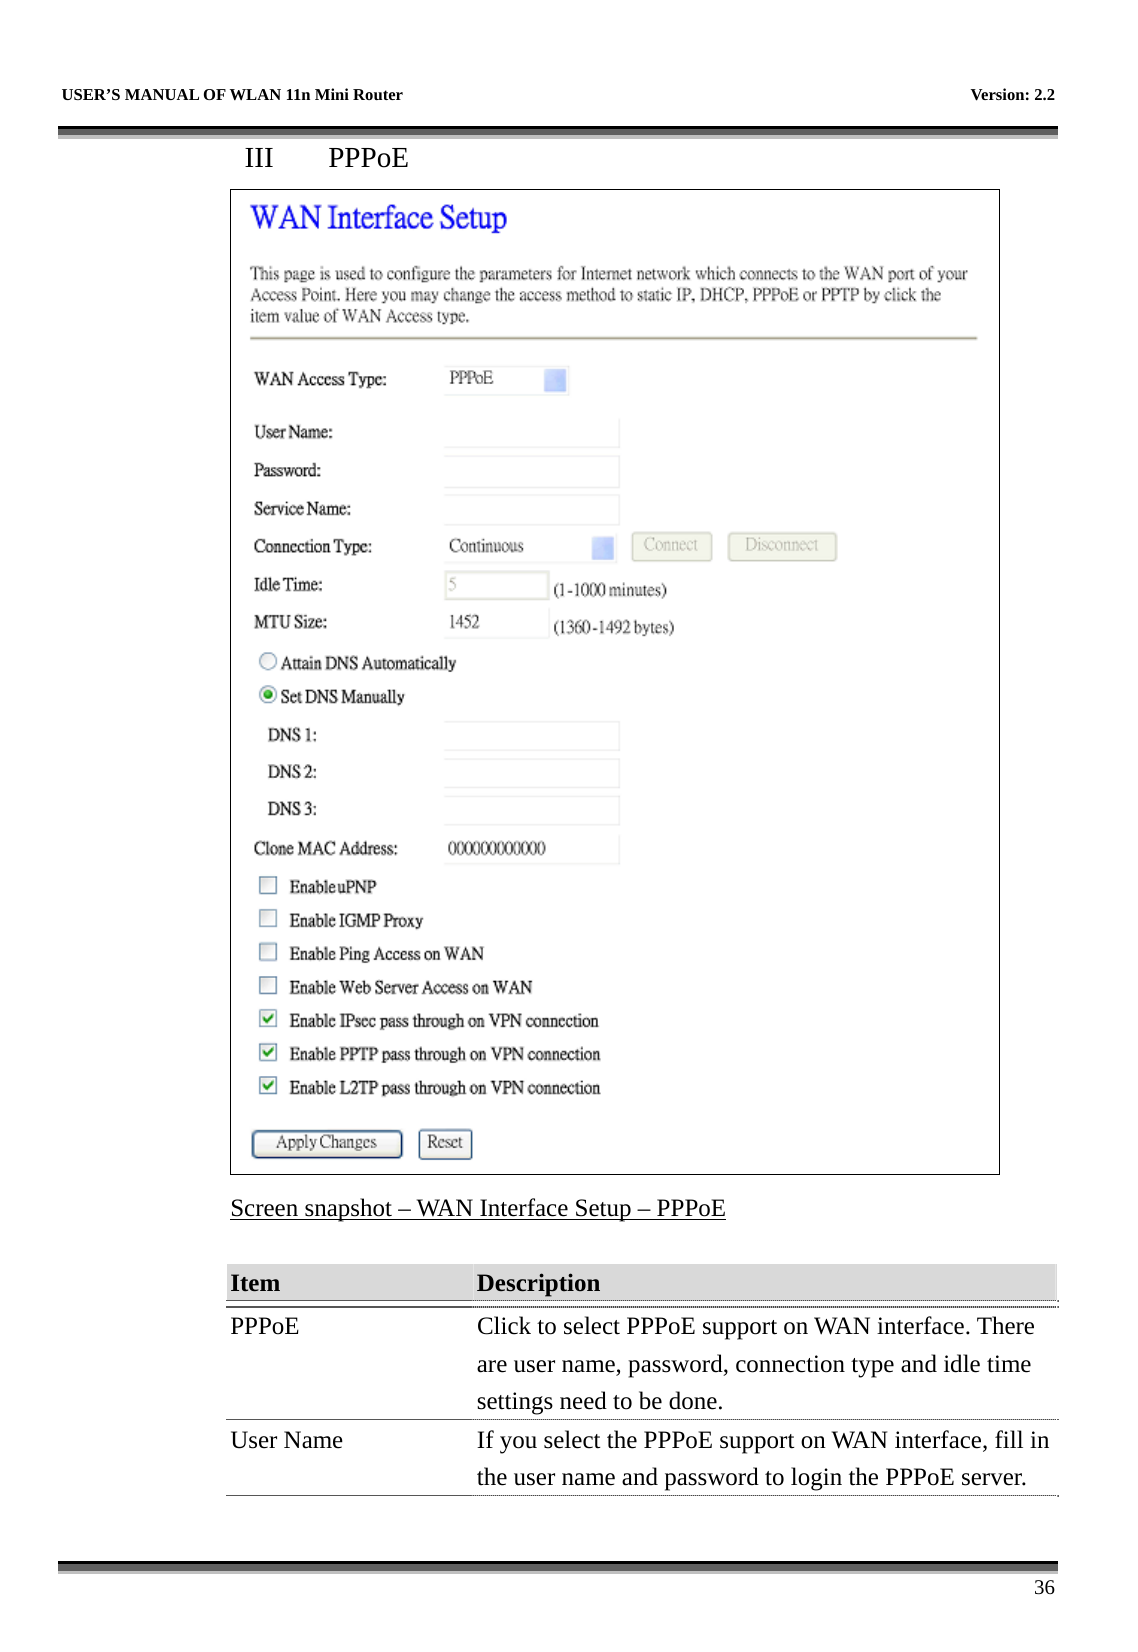   USER’S MANUAL OF WLAN 11n Mini Router    Version: 2.2      36 III  PPPoE  Screen snapshot – WAN Interface Setup – PPPoE  Item  Description   PPPoE  Click to select PPPoE support on WAN interface. There are user name, password, connection type and idle time settings need to be done. User Name  If you select the PPPoE support on WAN interface, fill in the user name and password to login the PPPoE server. 